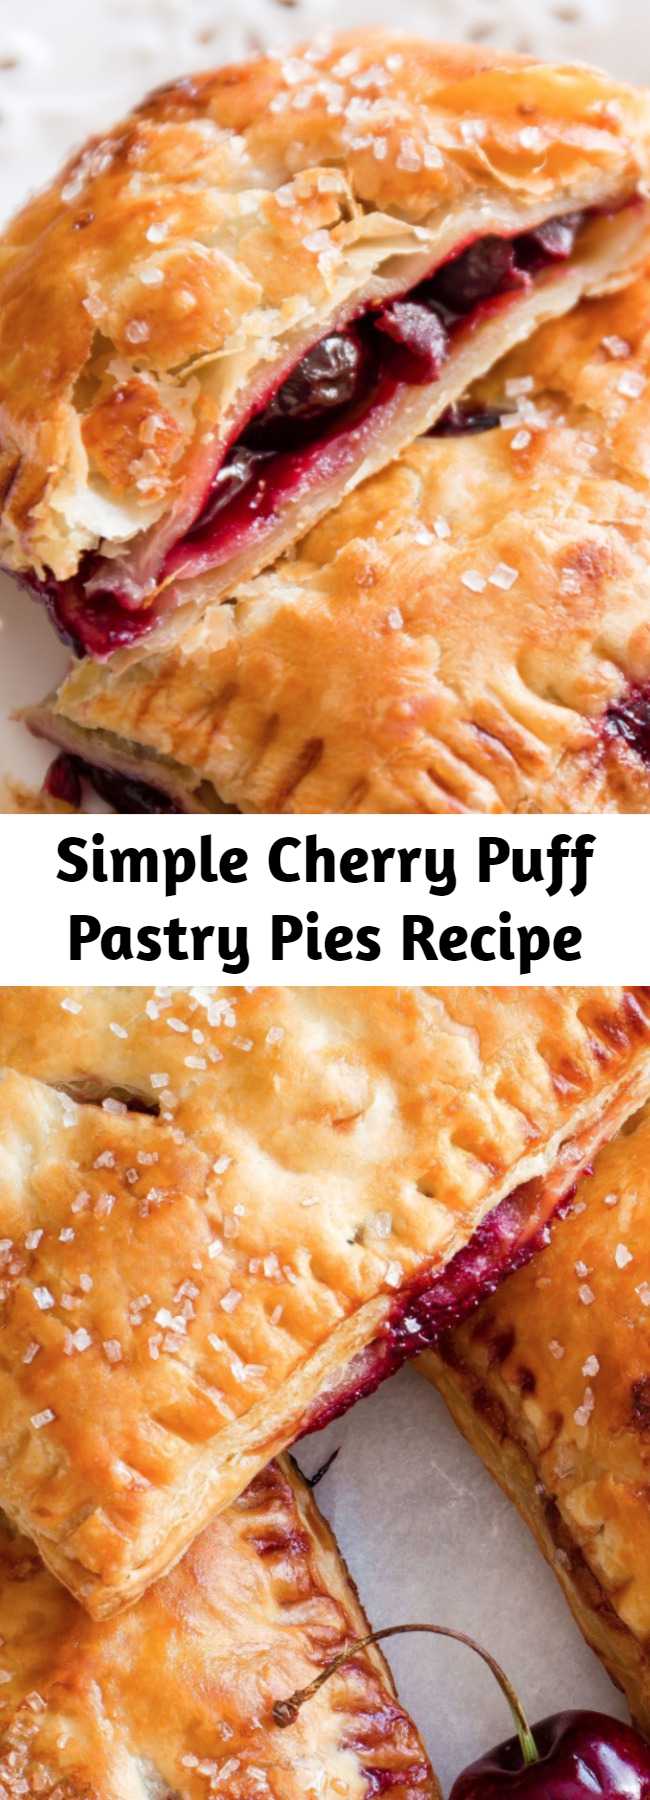 Simple Cherry Puff Pastry Pies Recipe